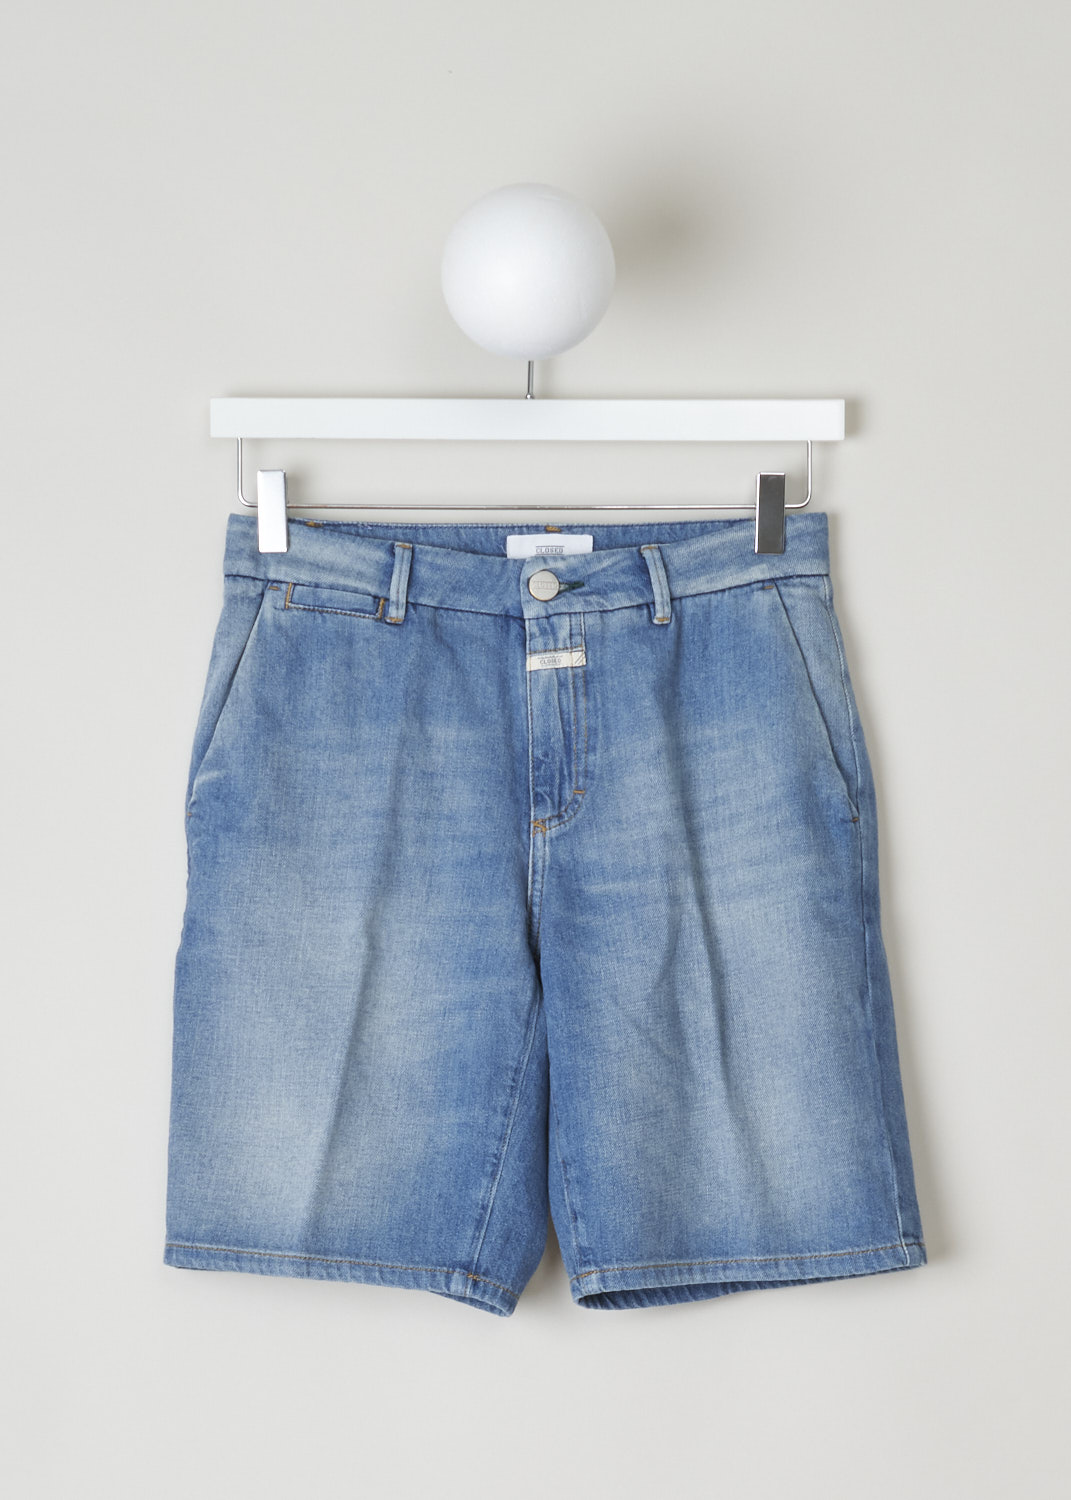 Closed, Jeans shorts, C92244_19P_4E_MLB, blue, front, Brighten up your wardrobe with these jeans shorts. Made in the chino model, so it has forward slanted pockets on the front and two jetted pockets on the back. The closure option here comes in the from of zipper and a regular button. 